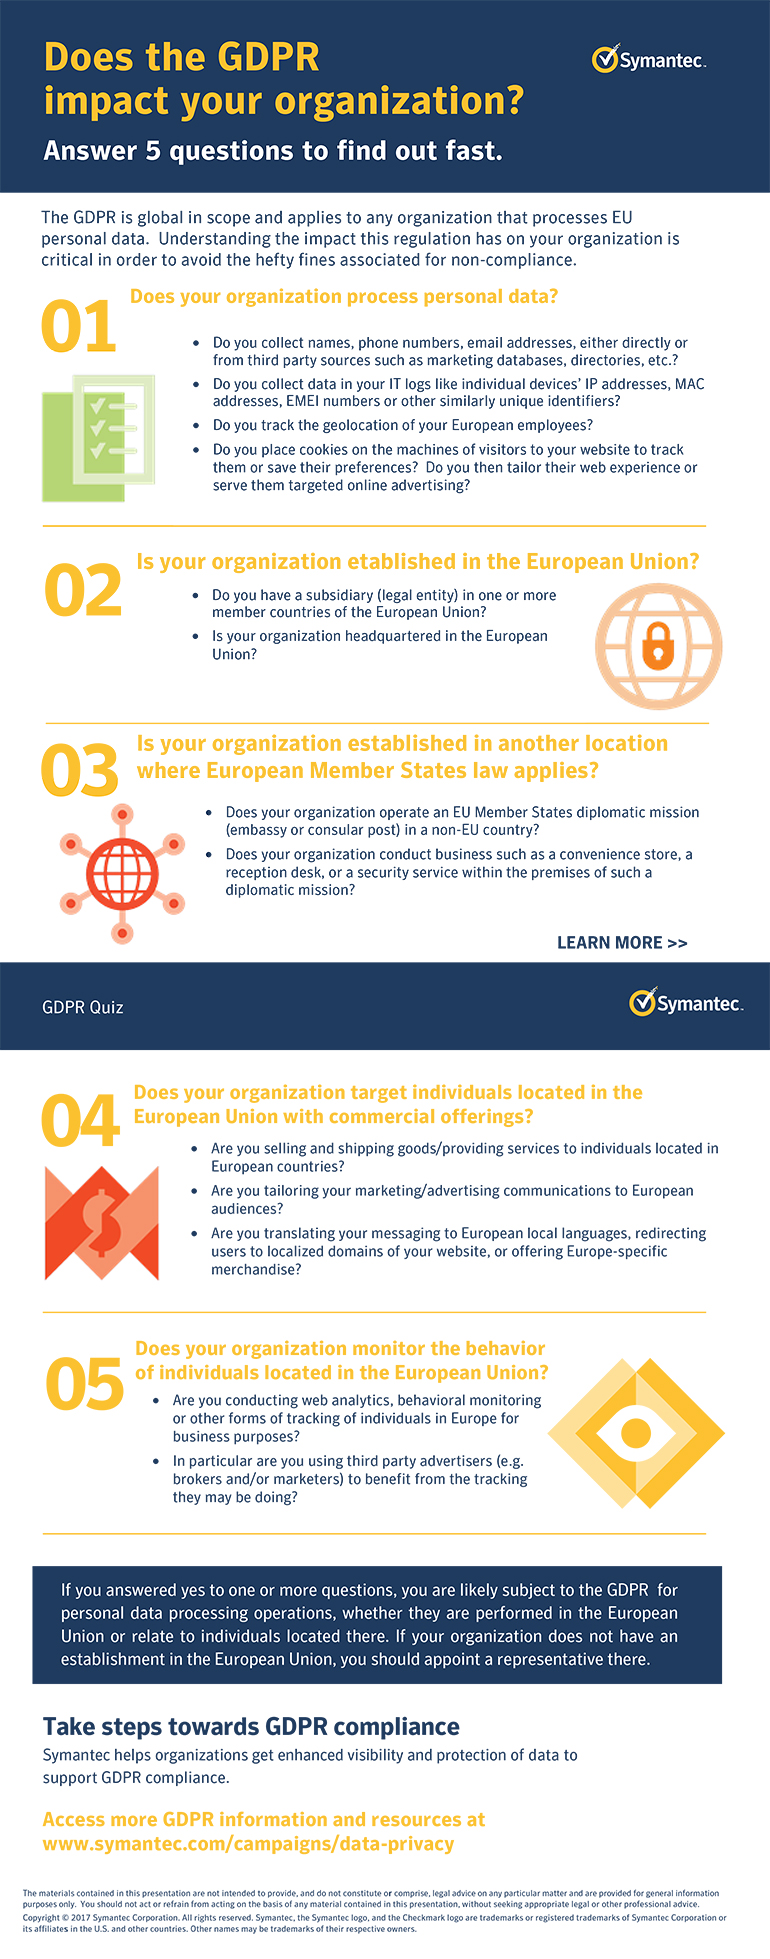 Does the GDPR impact your organization infographic as described by the text below